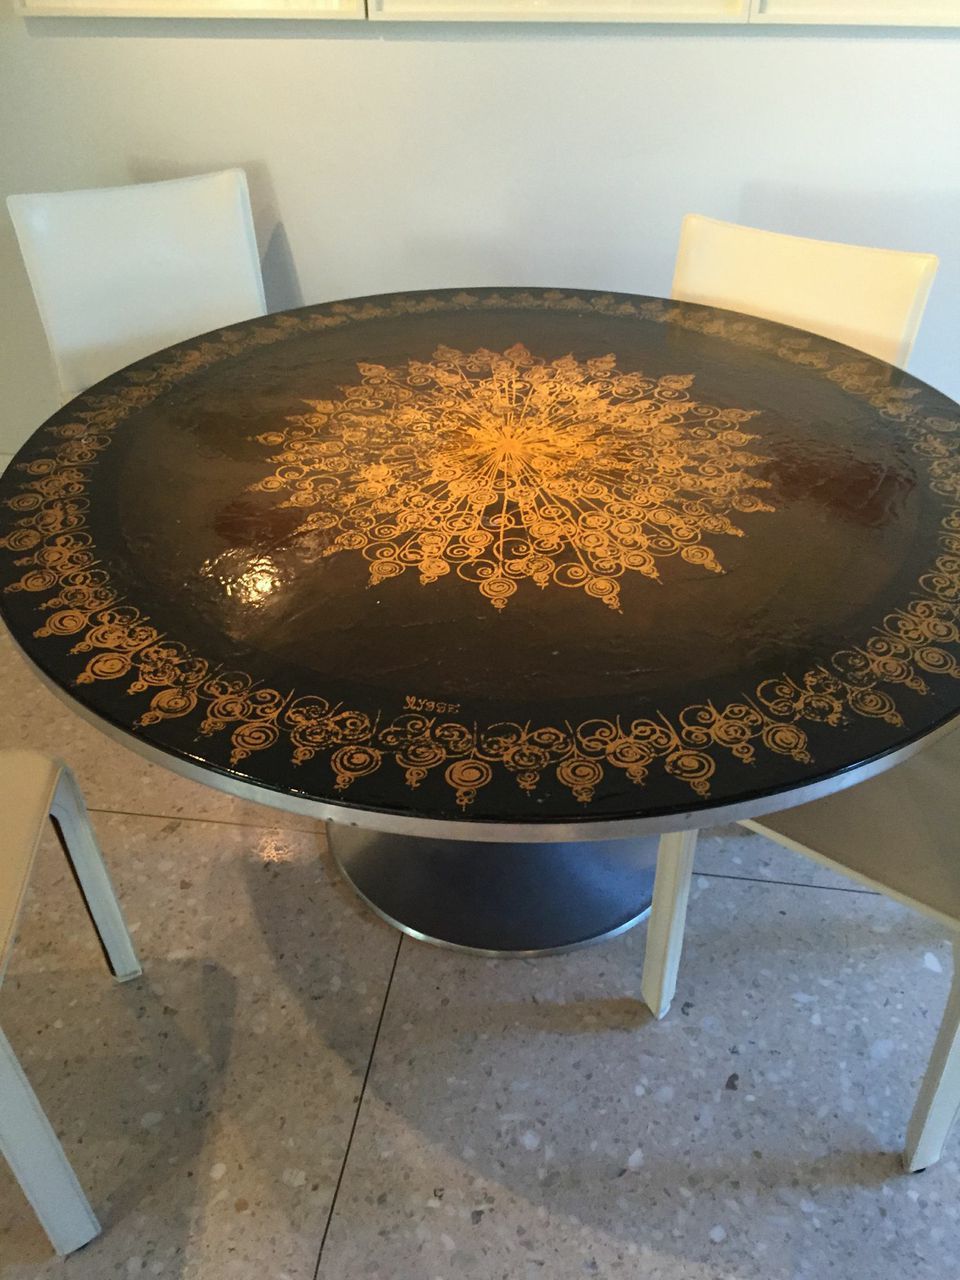 This unusual pedestal dining table has a gilt decorated leather top on a brushed aluminum base. Manufactured by France & Son (label underneath) and designed by Danish designer, Mygge (signature on top).